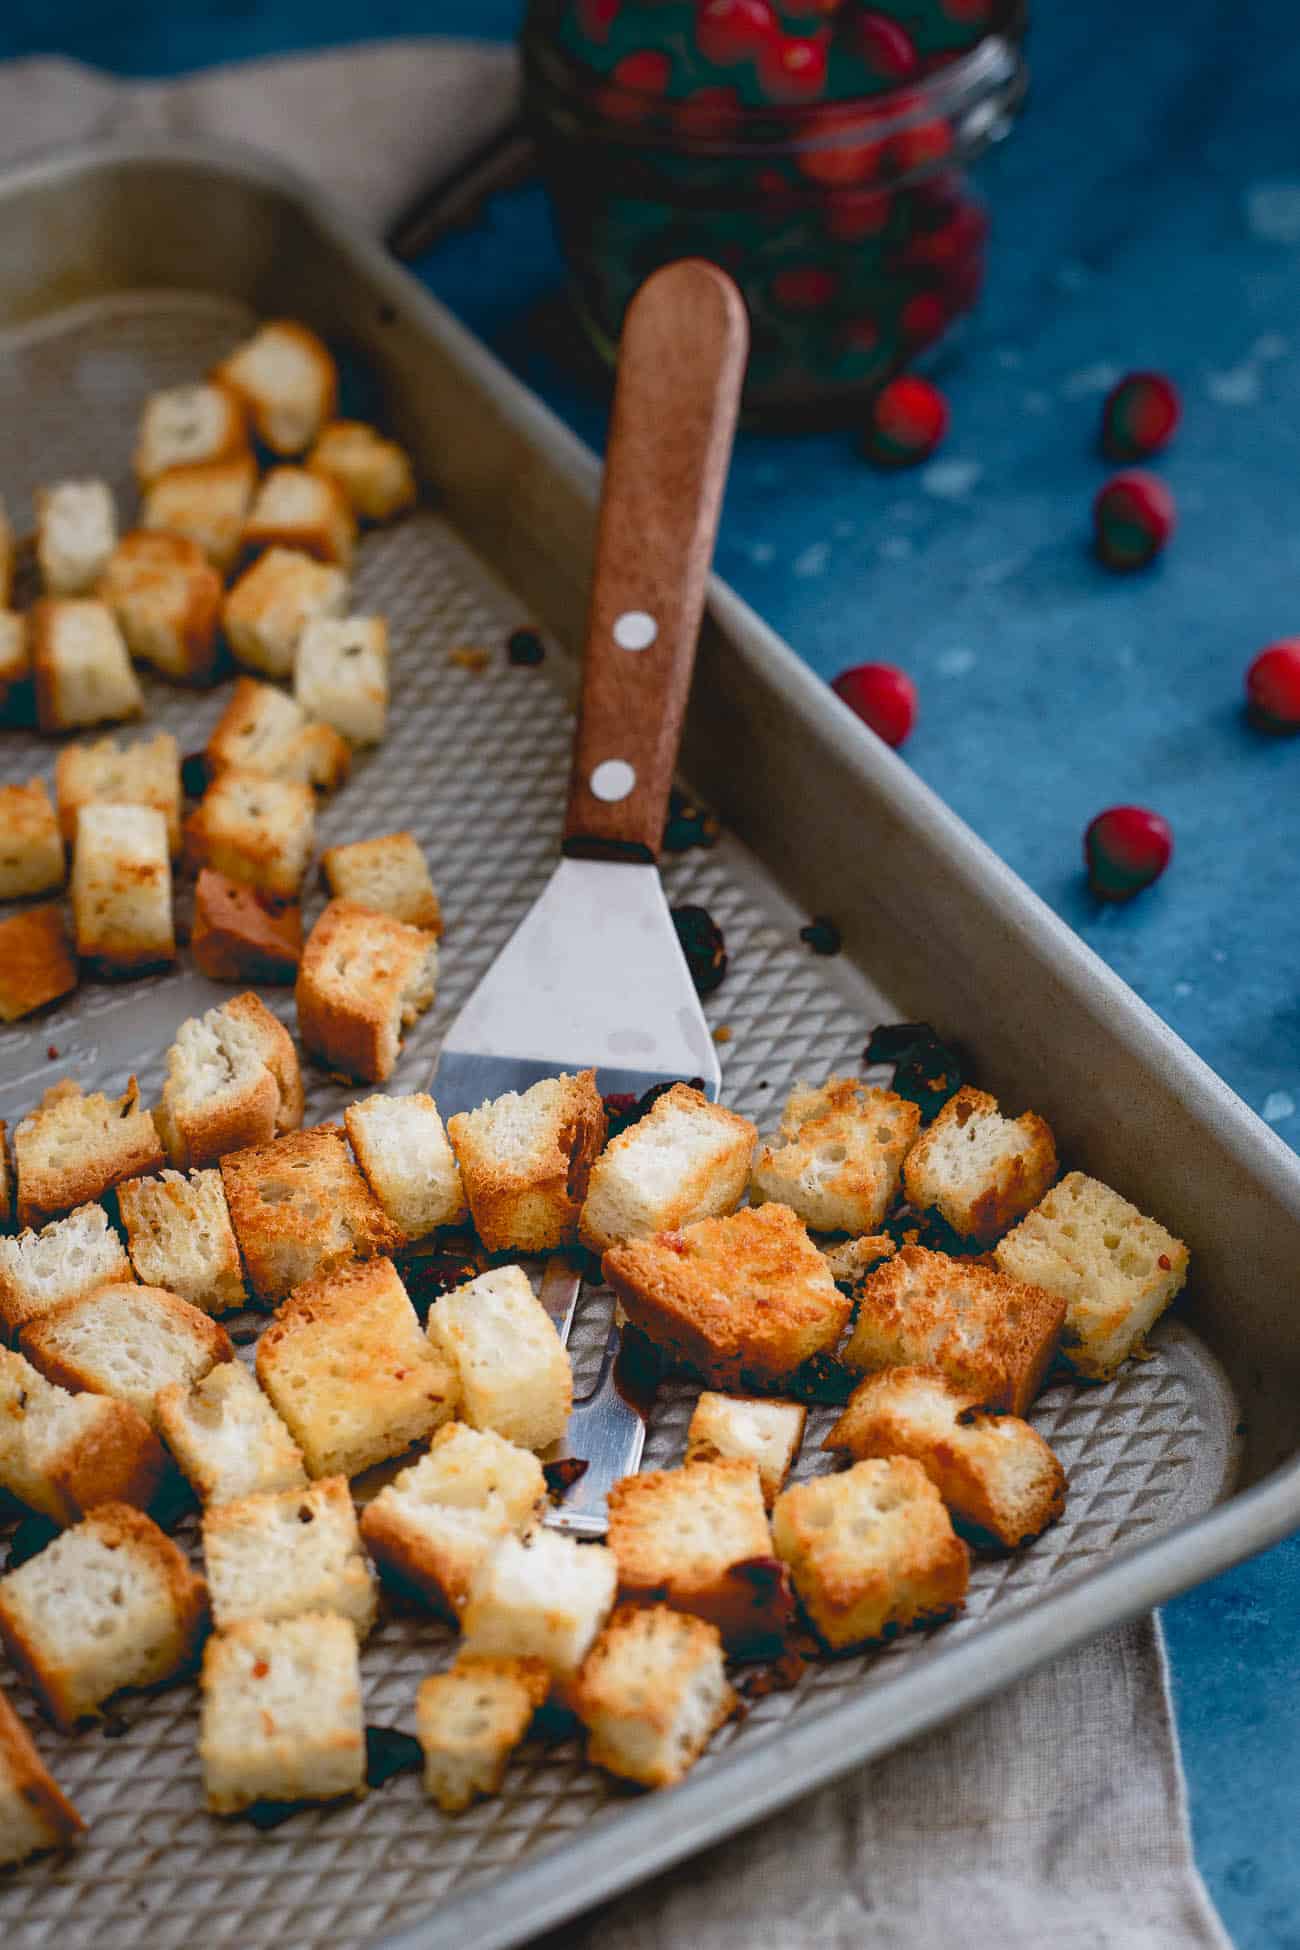 Homemade croutons on a pan with a spatula as a topping for broccoli salad.